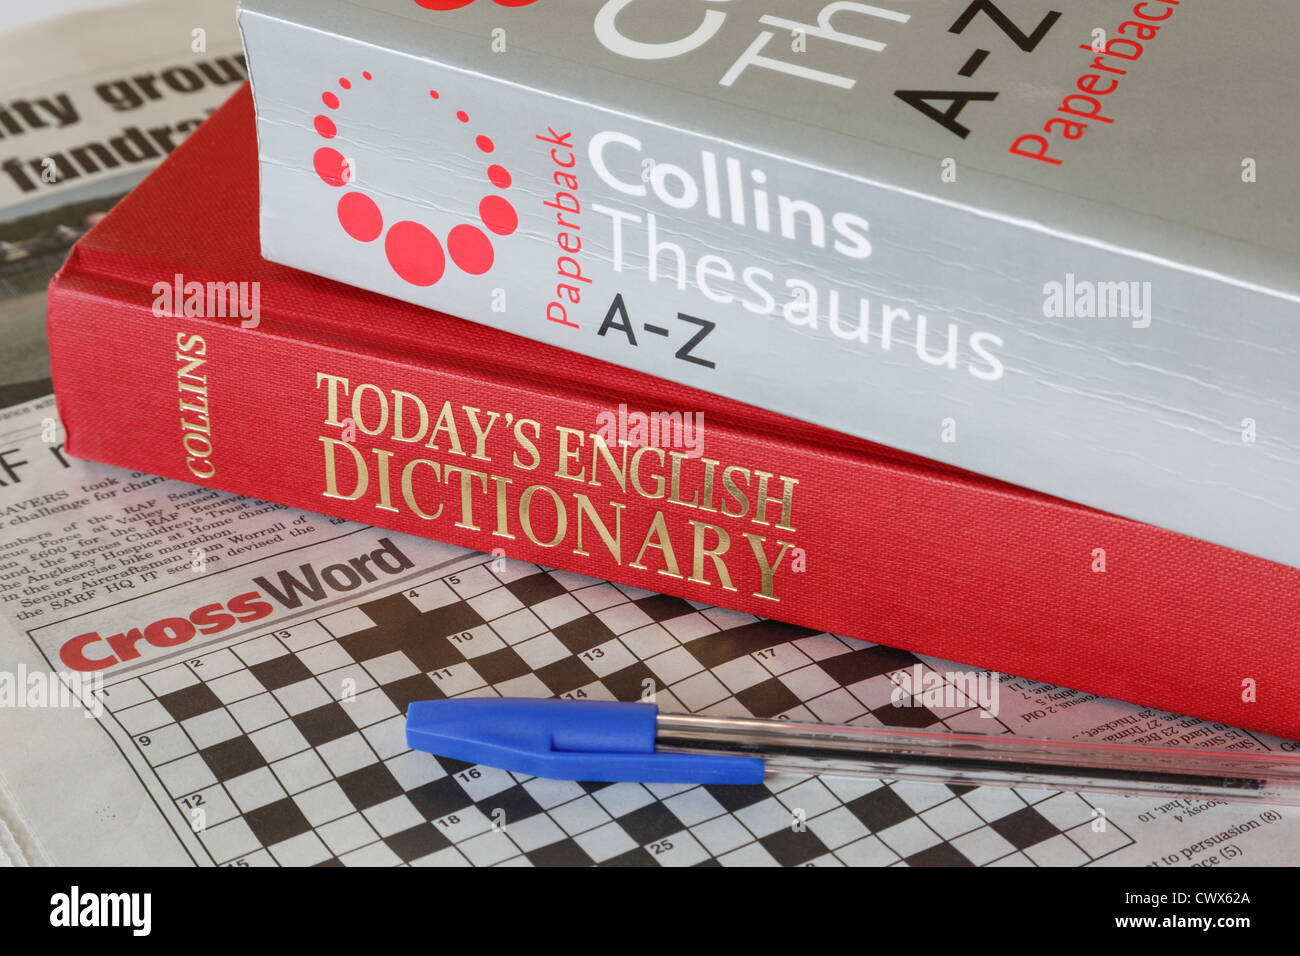 Collins A-Z Thesaurus and Today's English Dictionary books with a newspaper crossword puzzle and pen. England UK Britain Stock Photo